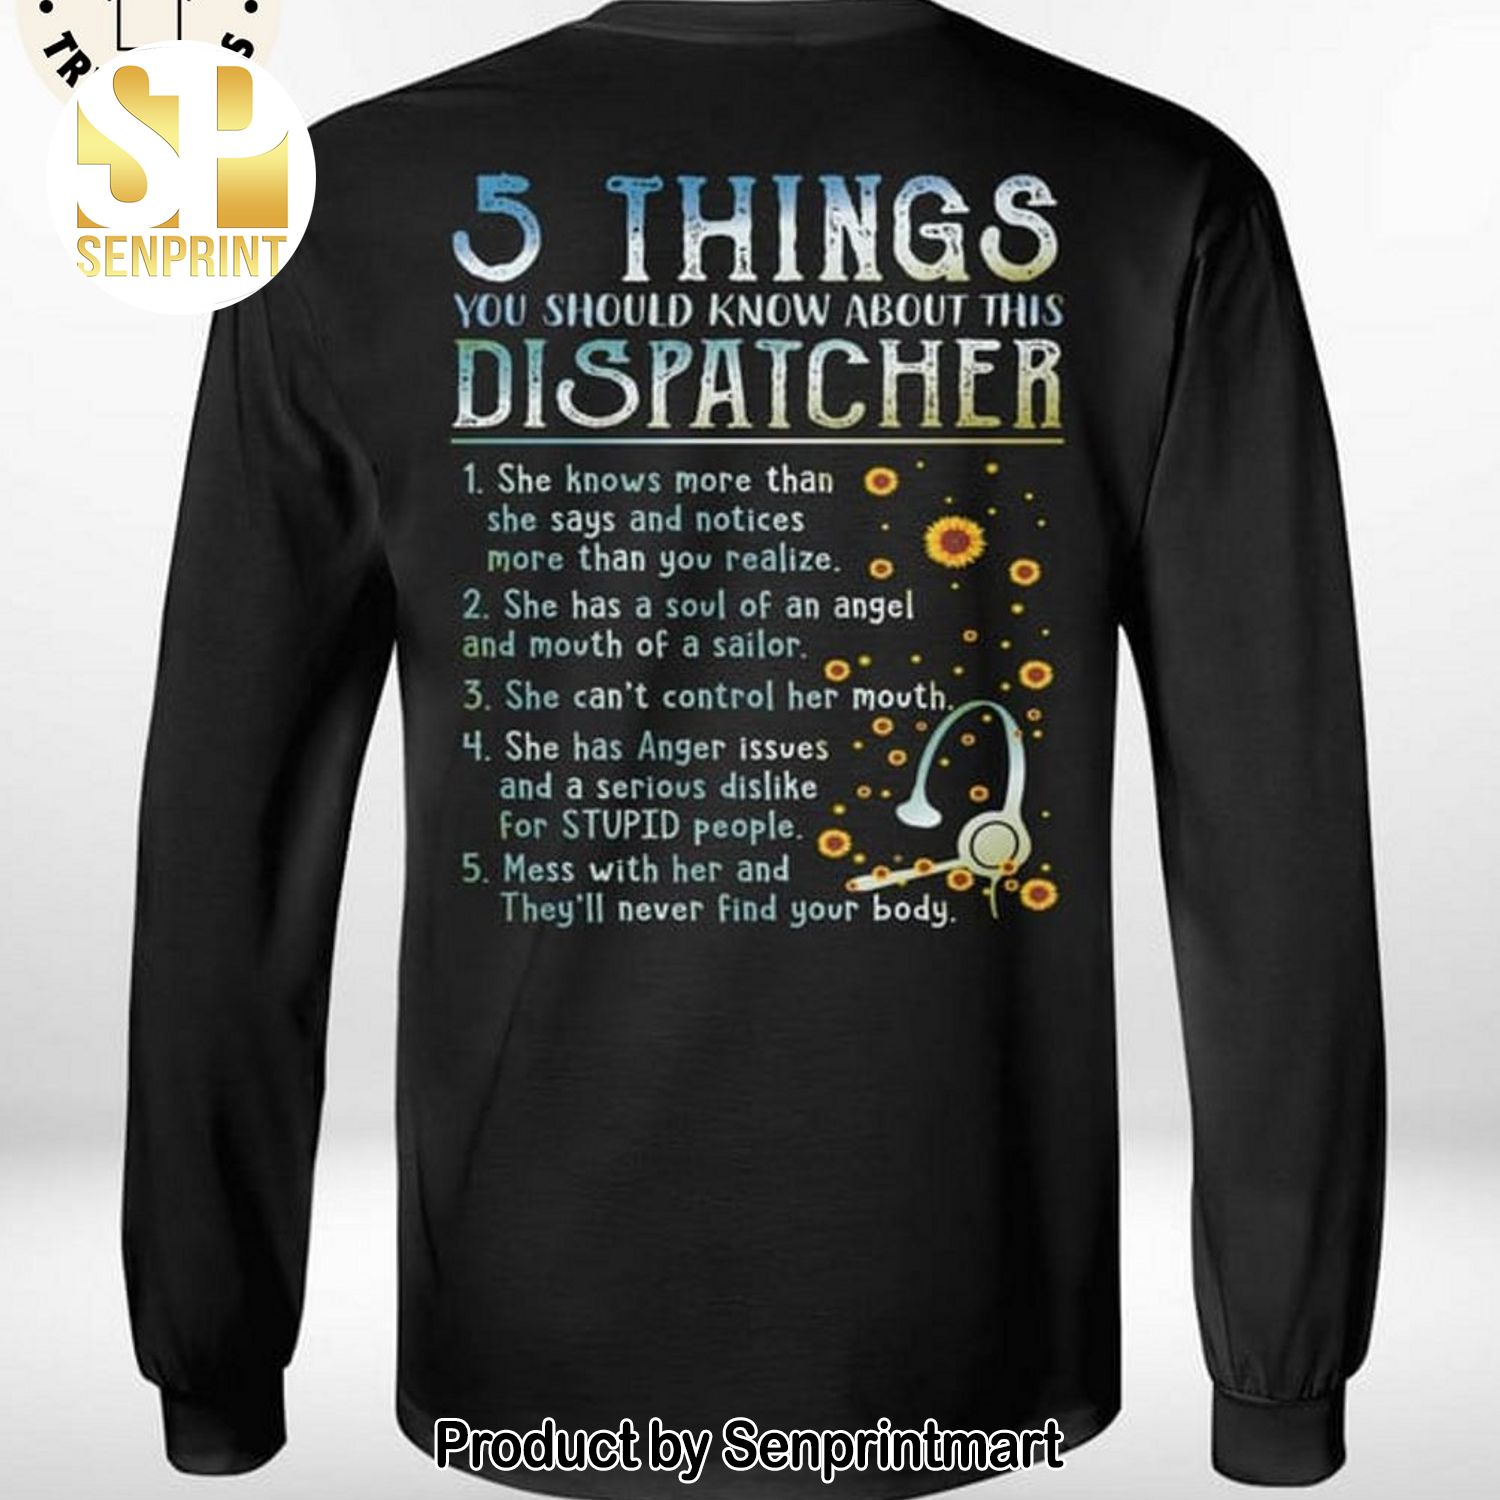 5 Things You Should Know About This Dispatcher Full Printed Shirt